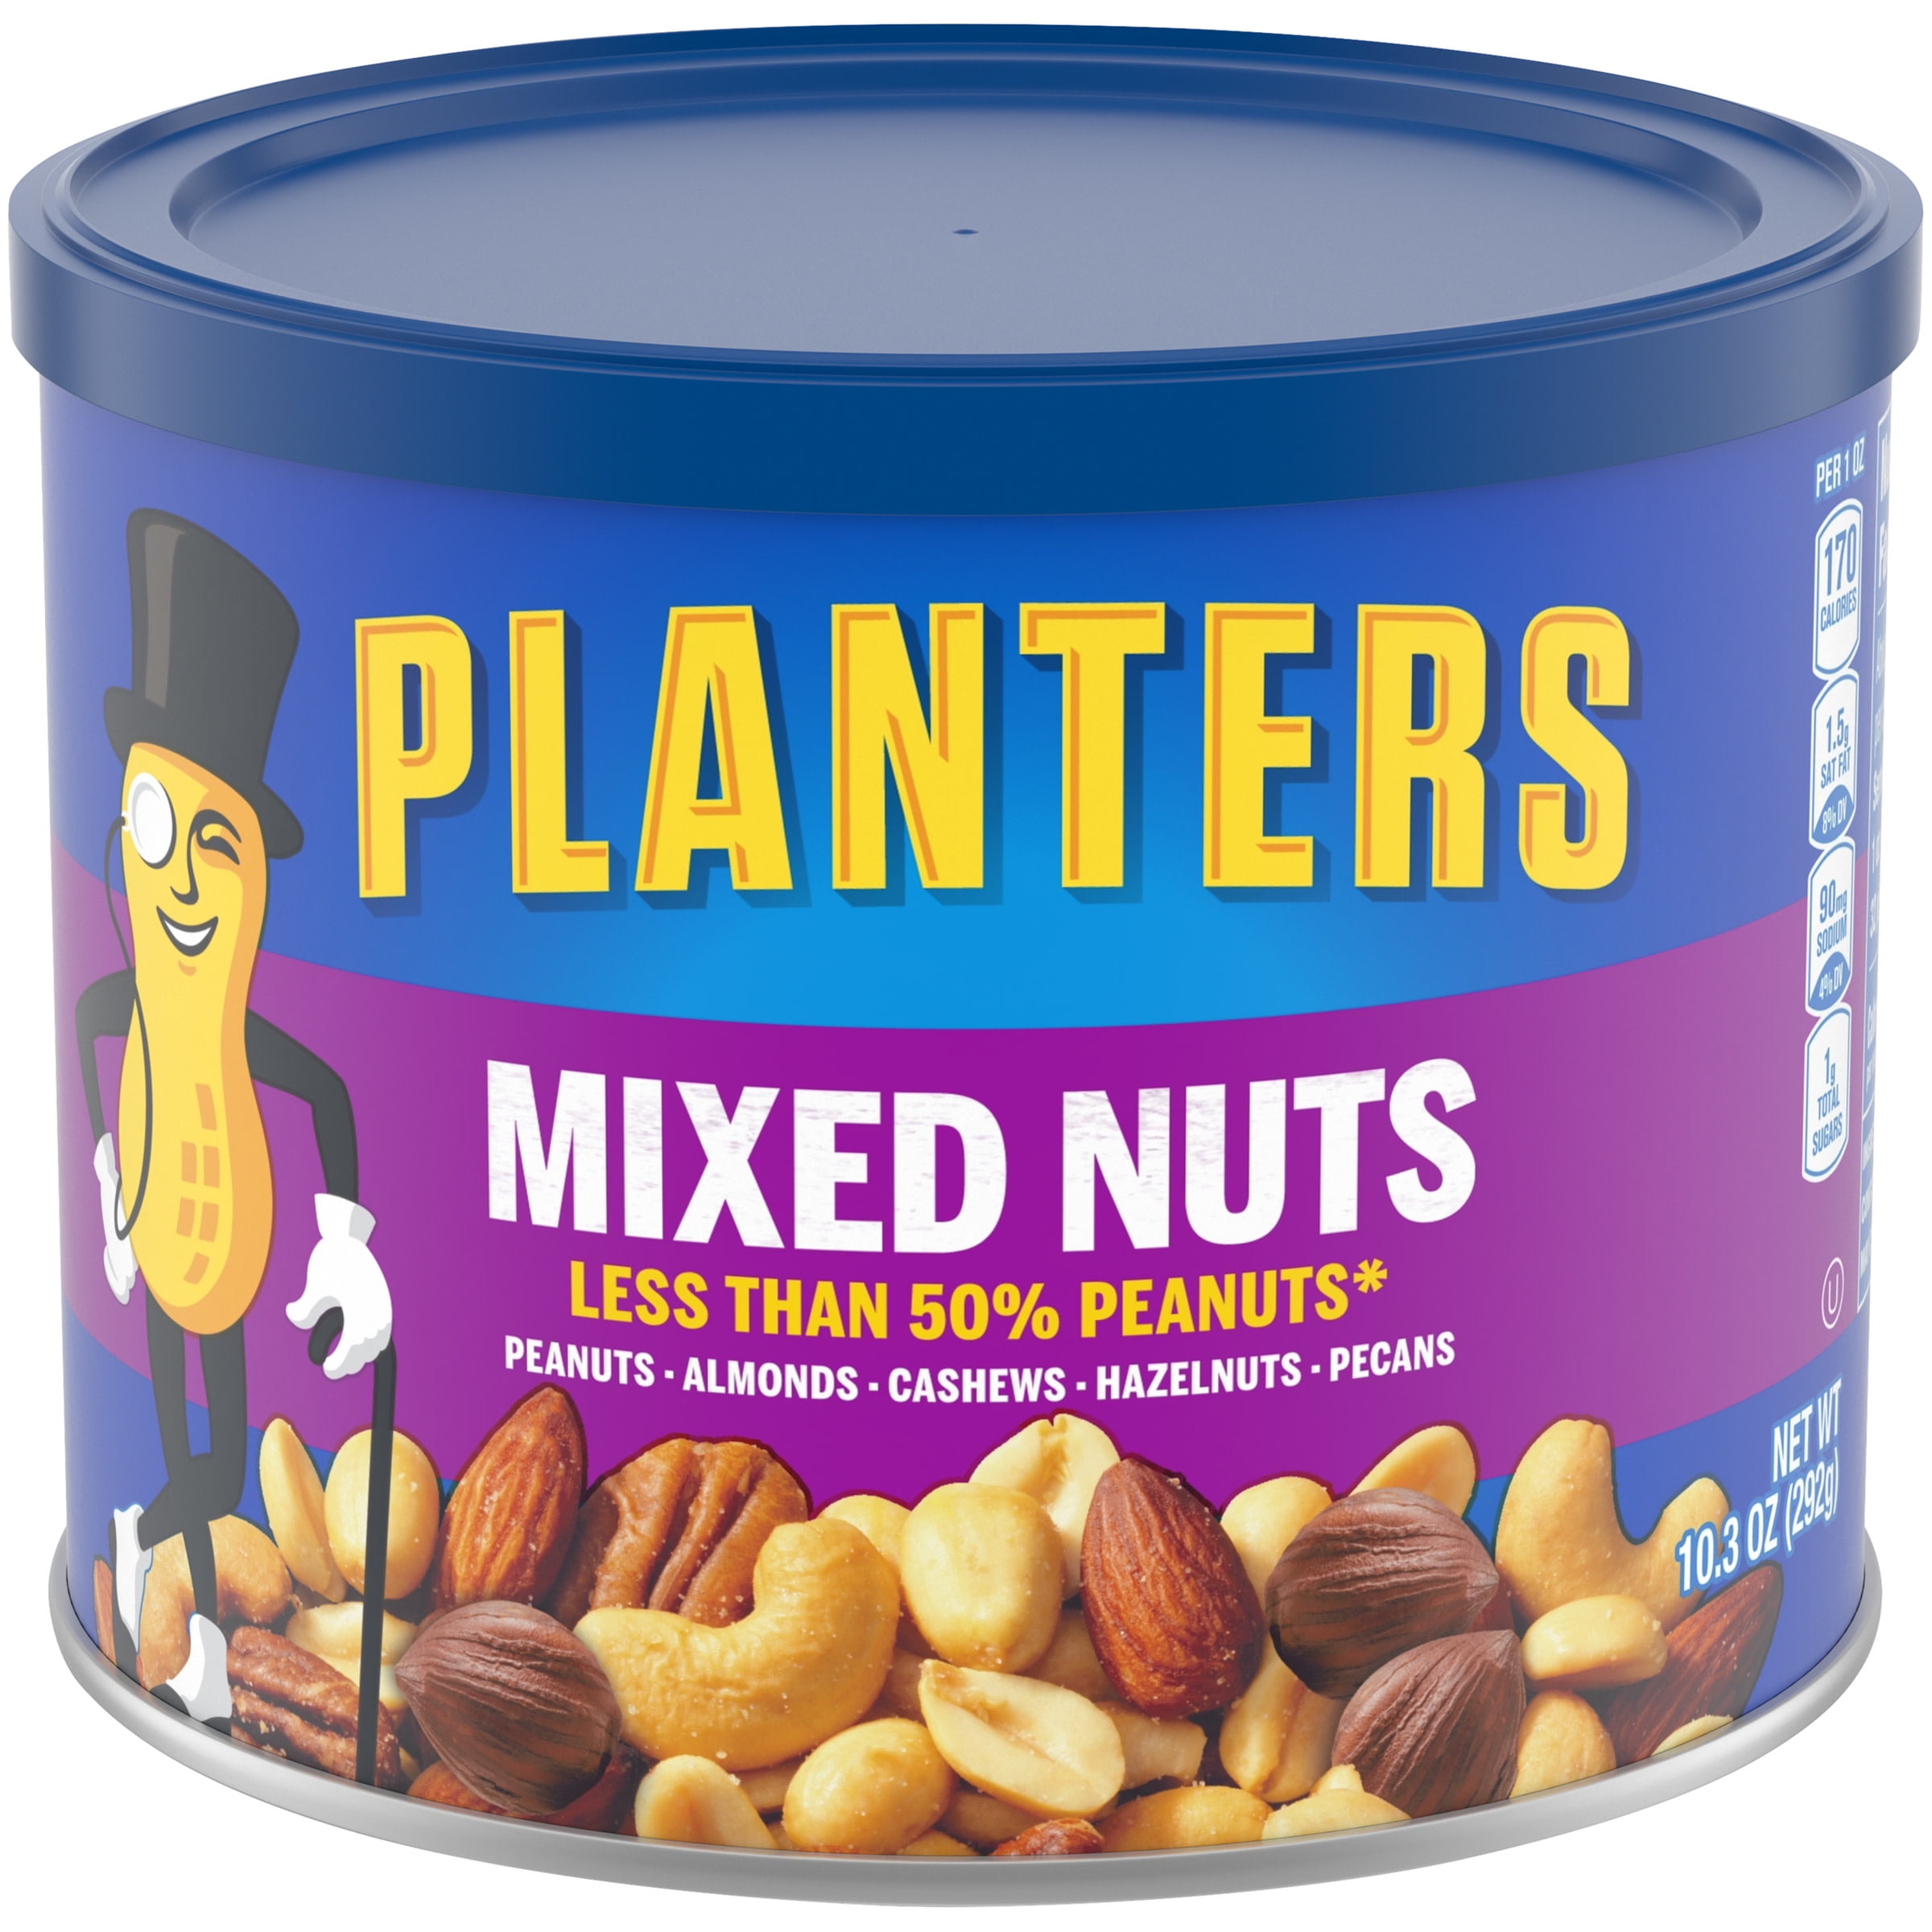 Planters Mixed Nuts Less Than 50 Peanuts with Peanuts, Almonds